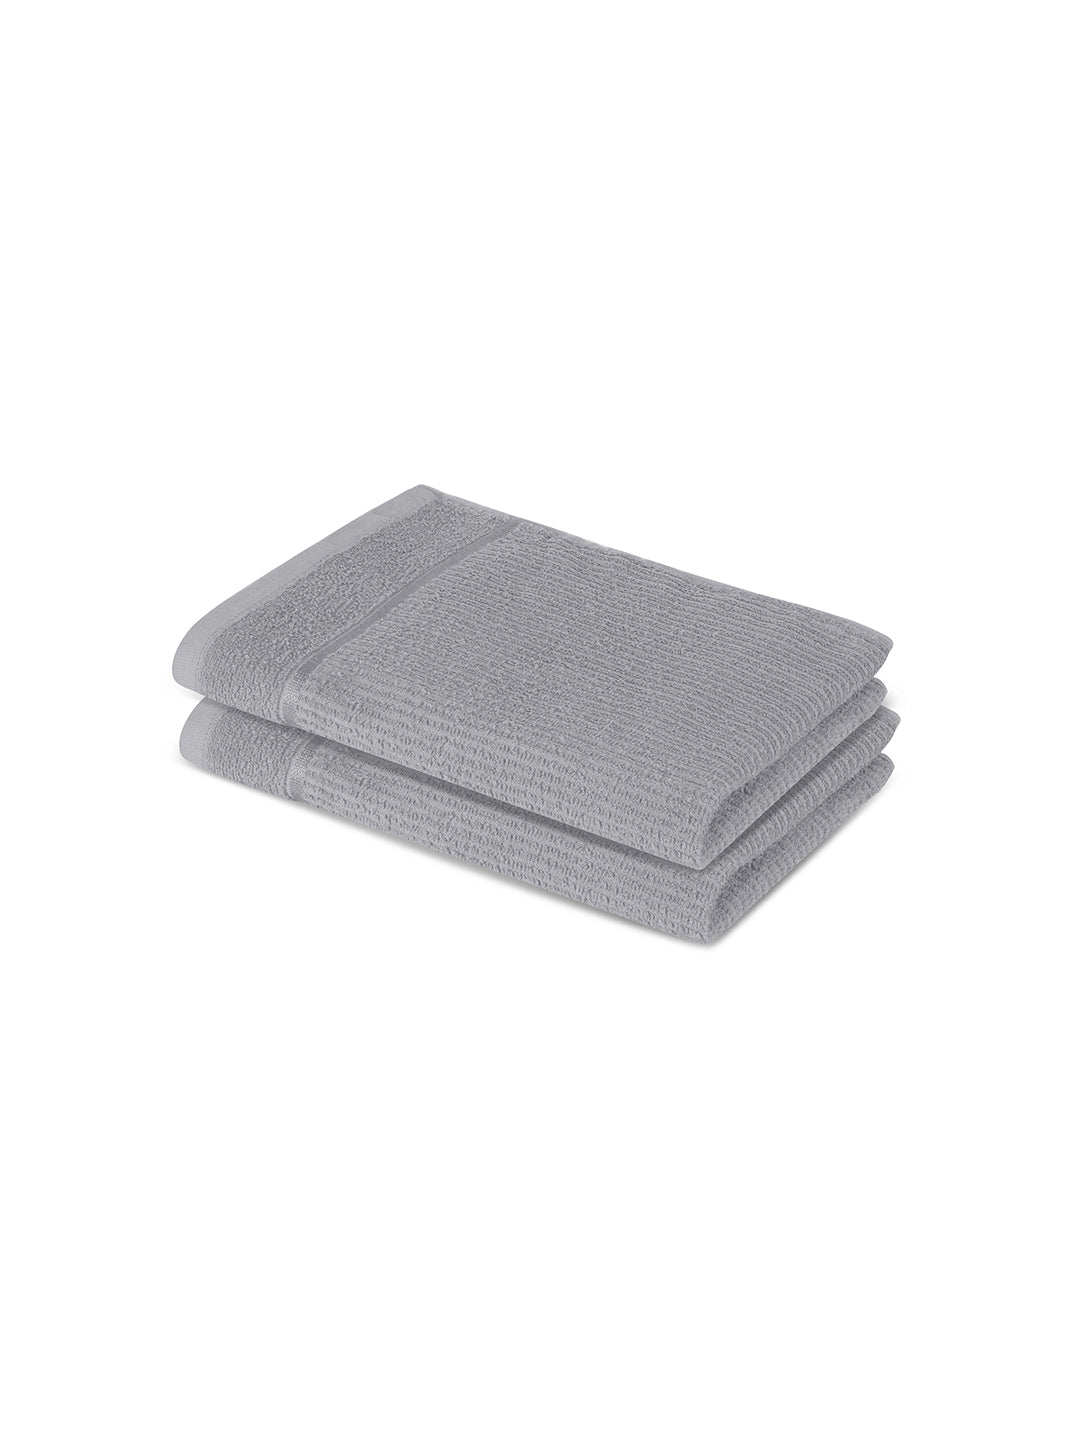 Comfort Classic Quickdry Pack of 2 Hand Towels